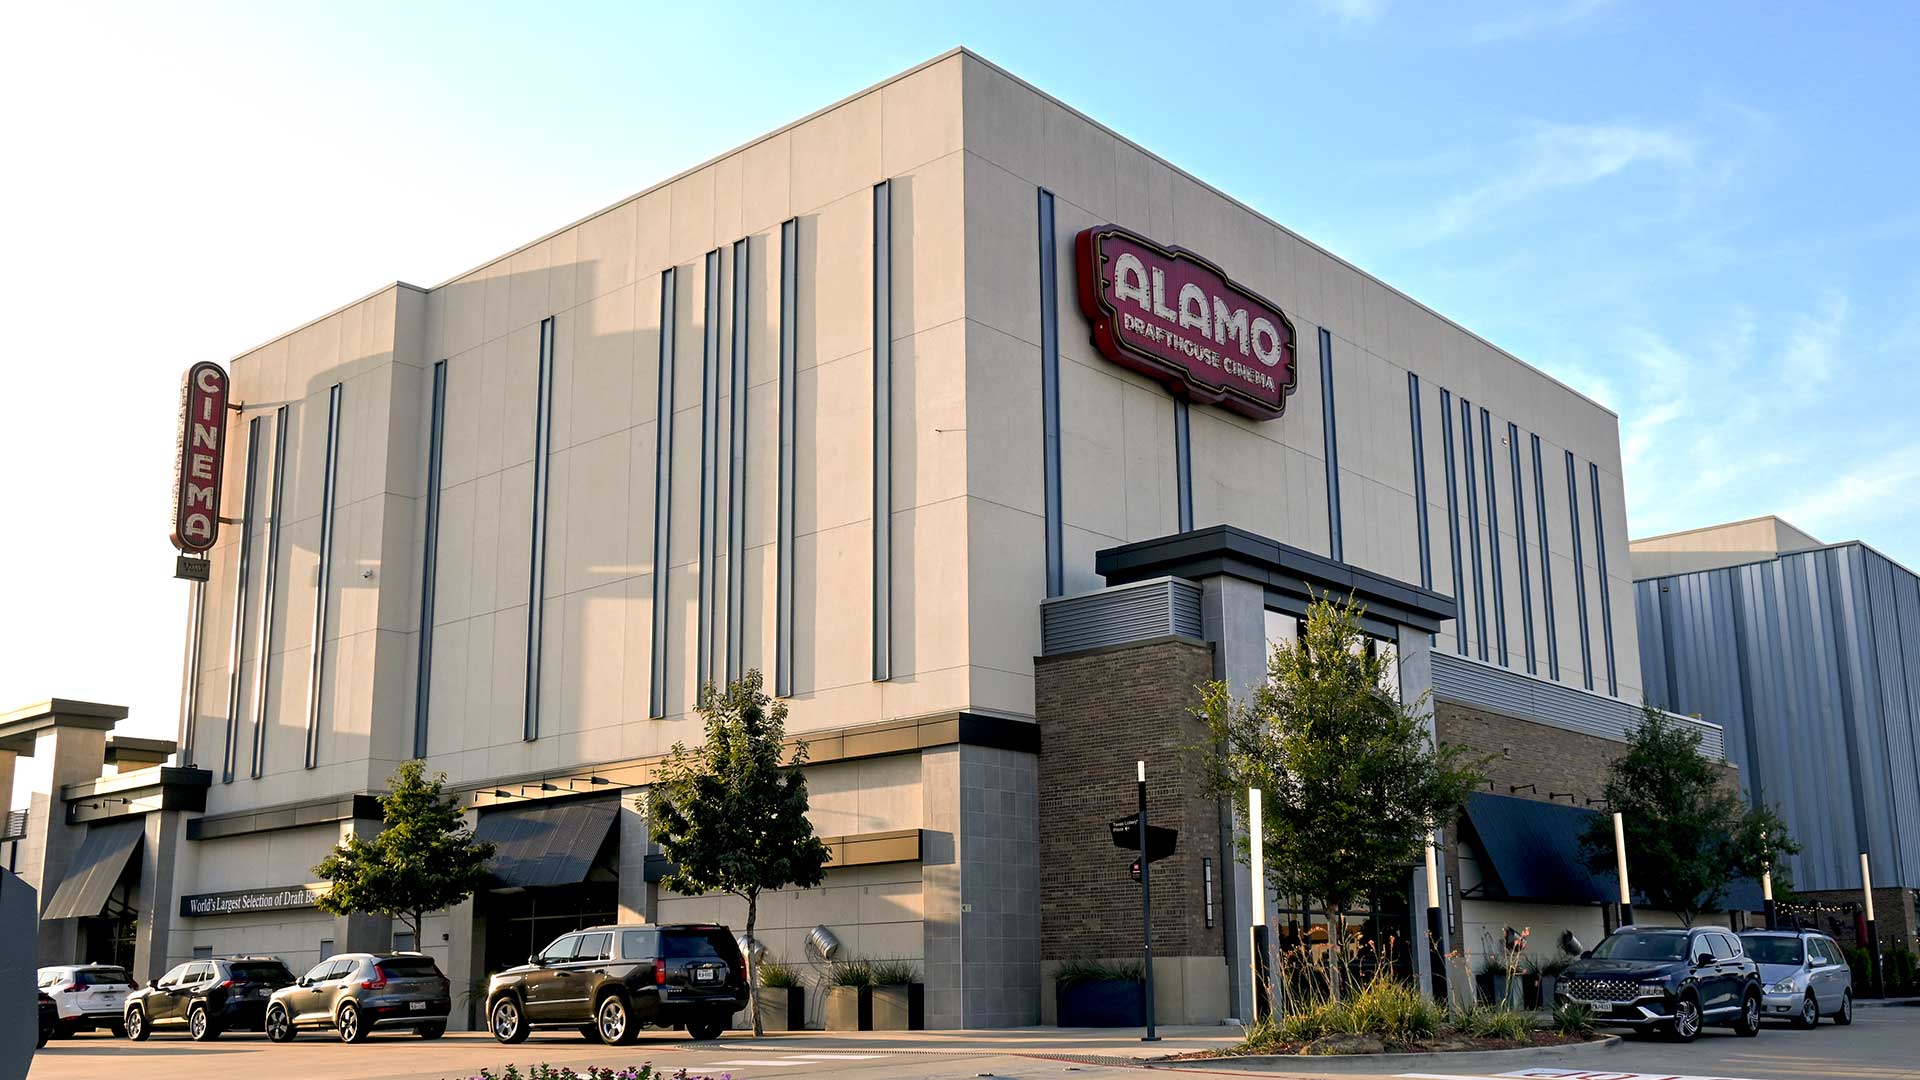 Looking at the square concrete building of the Alamo Drafthouse Cinema from across the street. There are cars parked in front of the building.